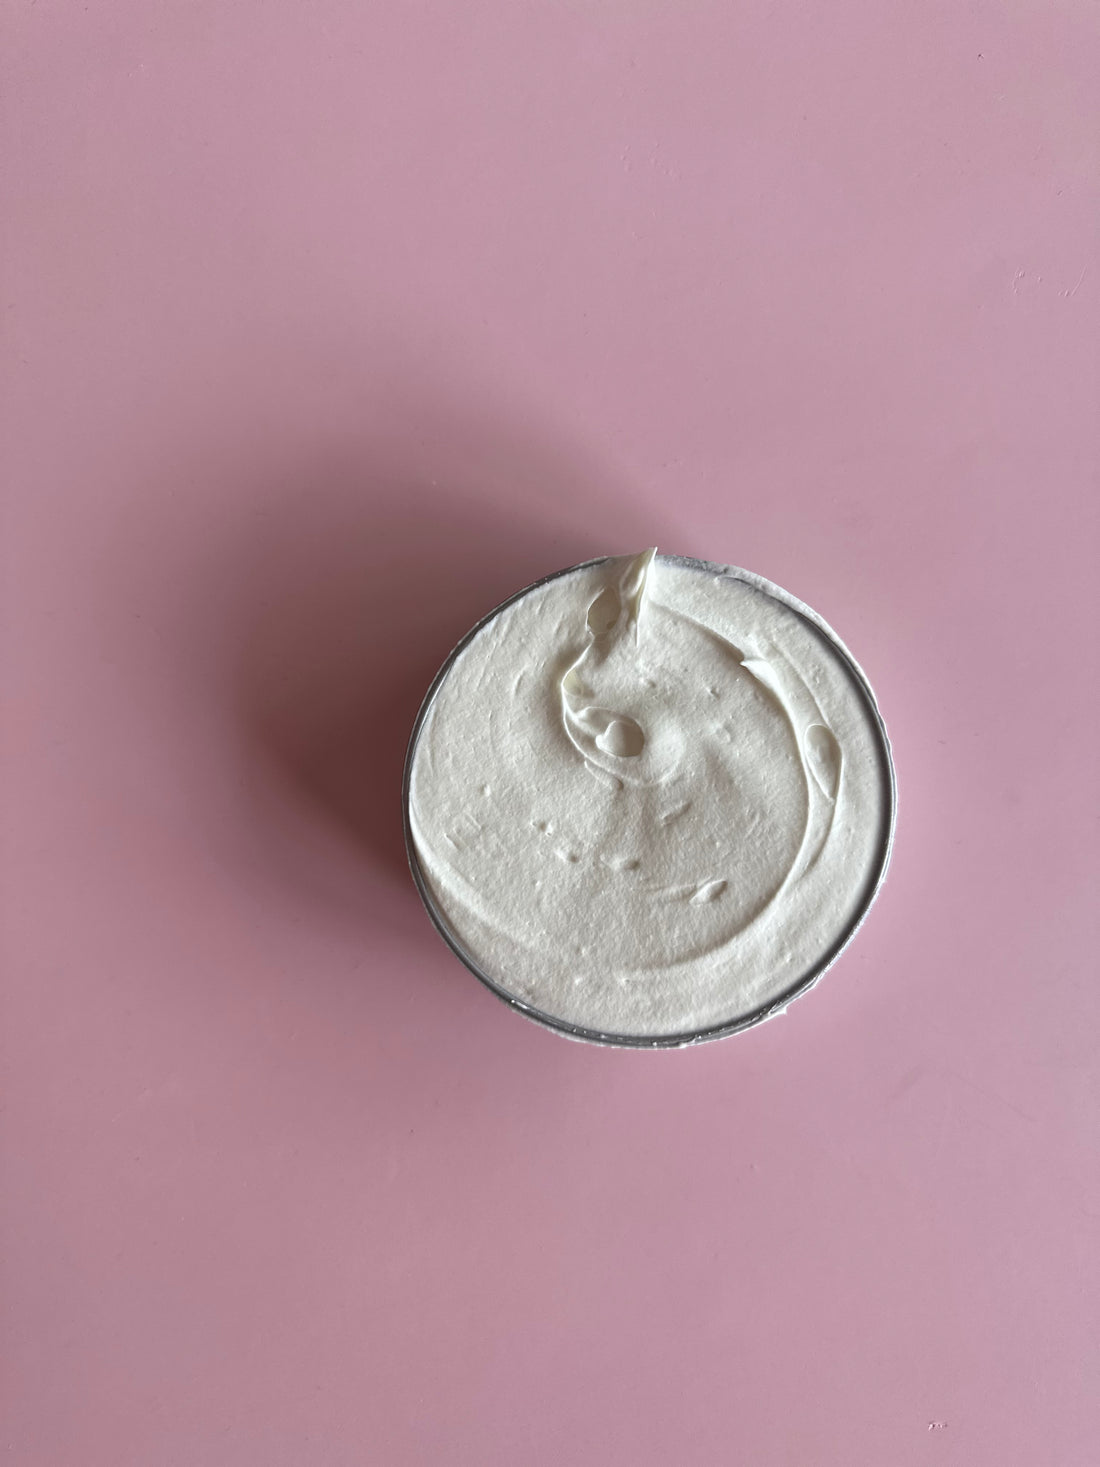 Why are our whipped body butters seasonal?